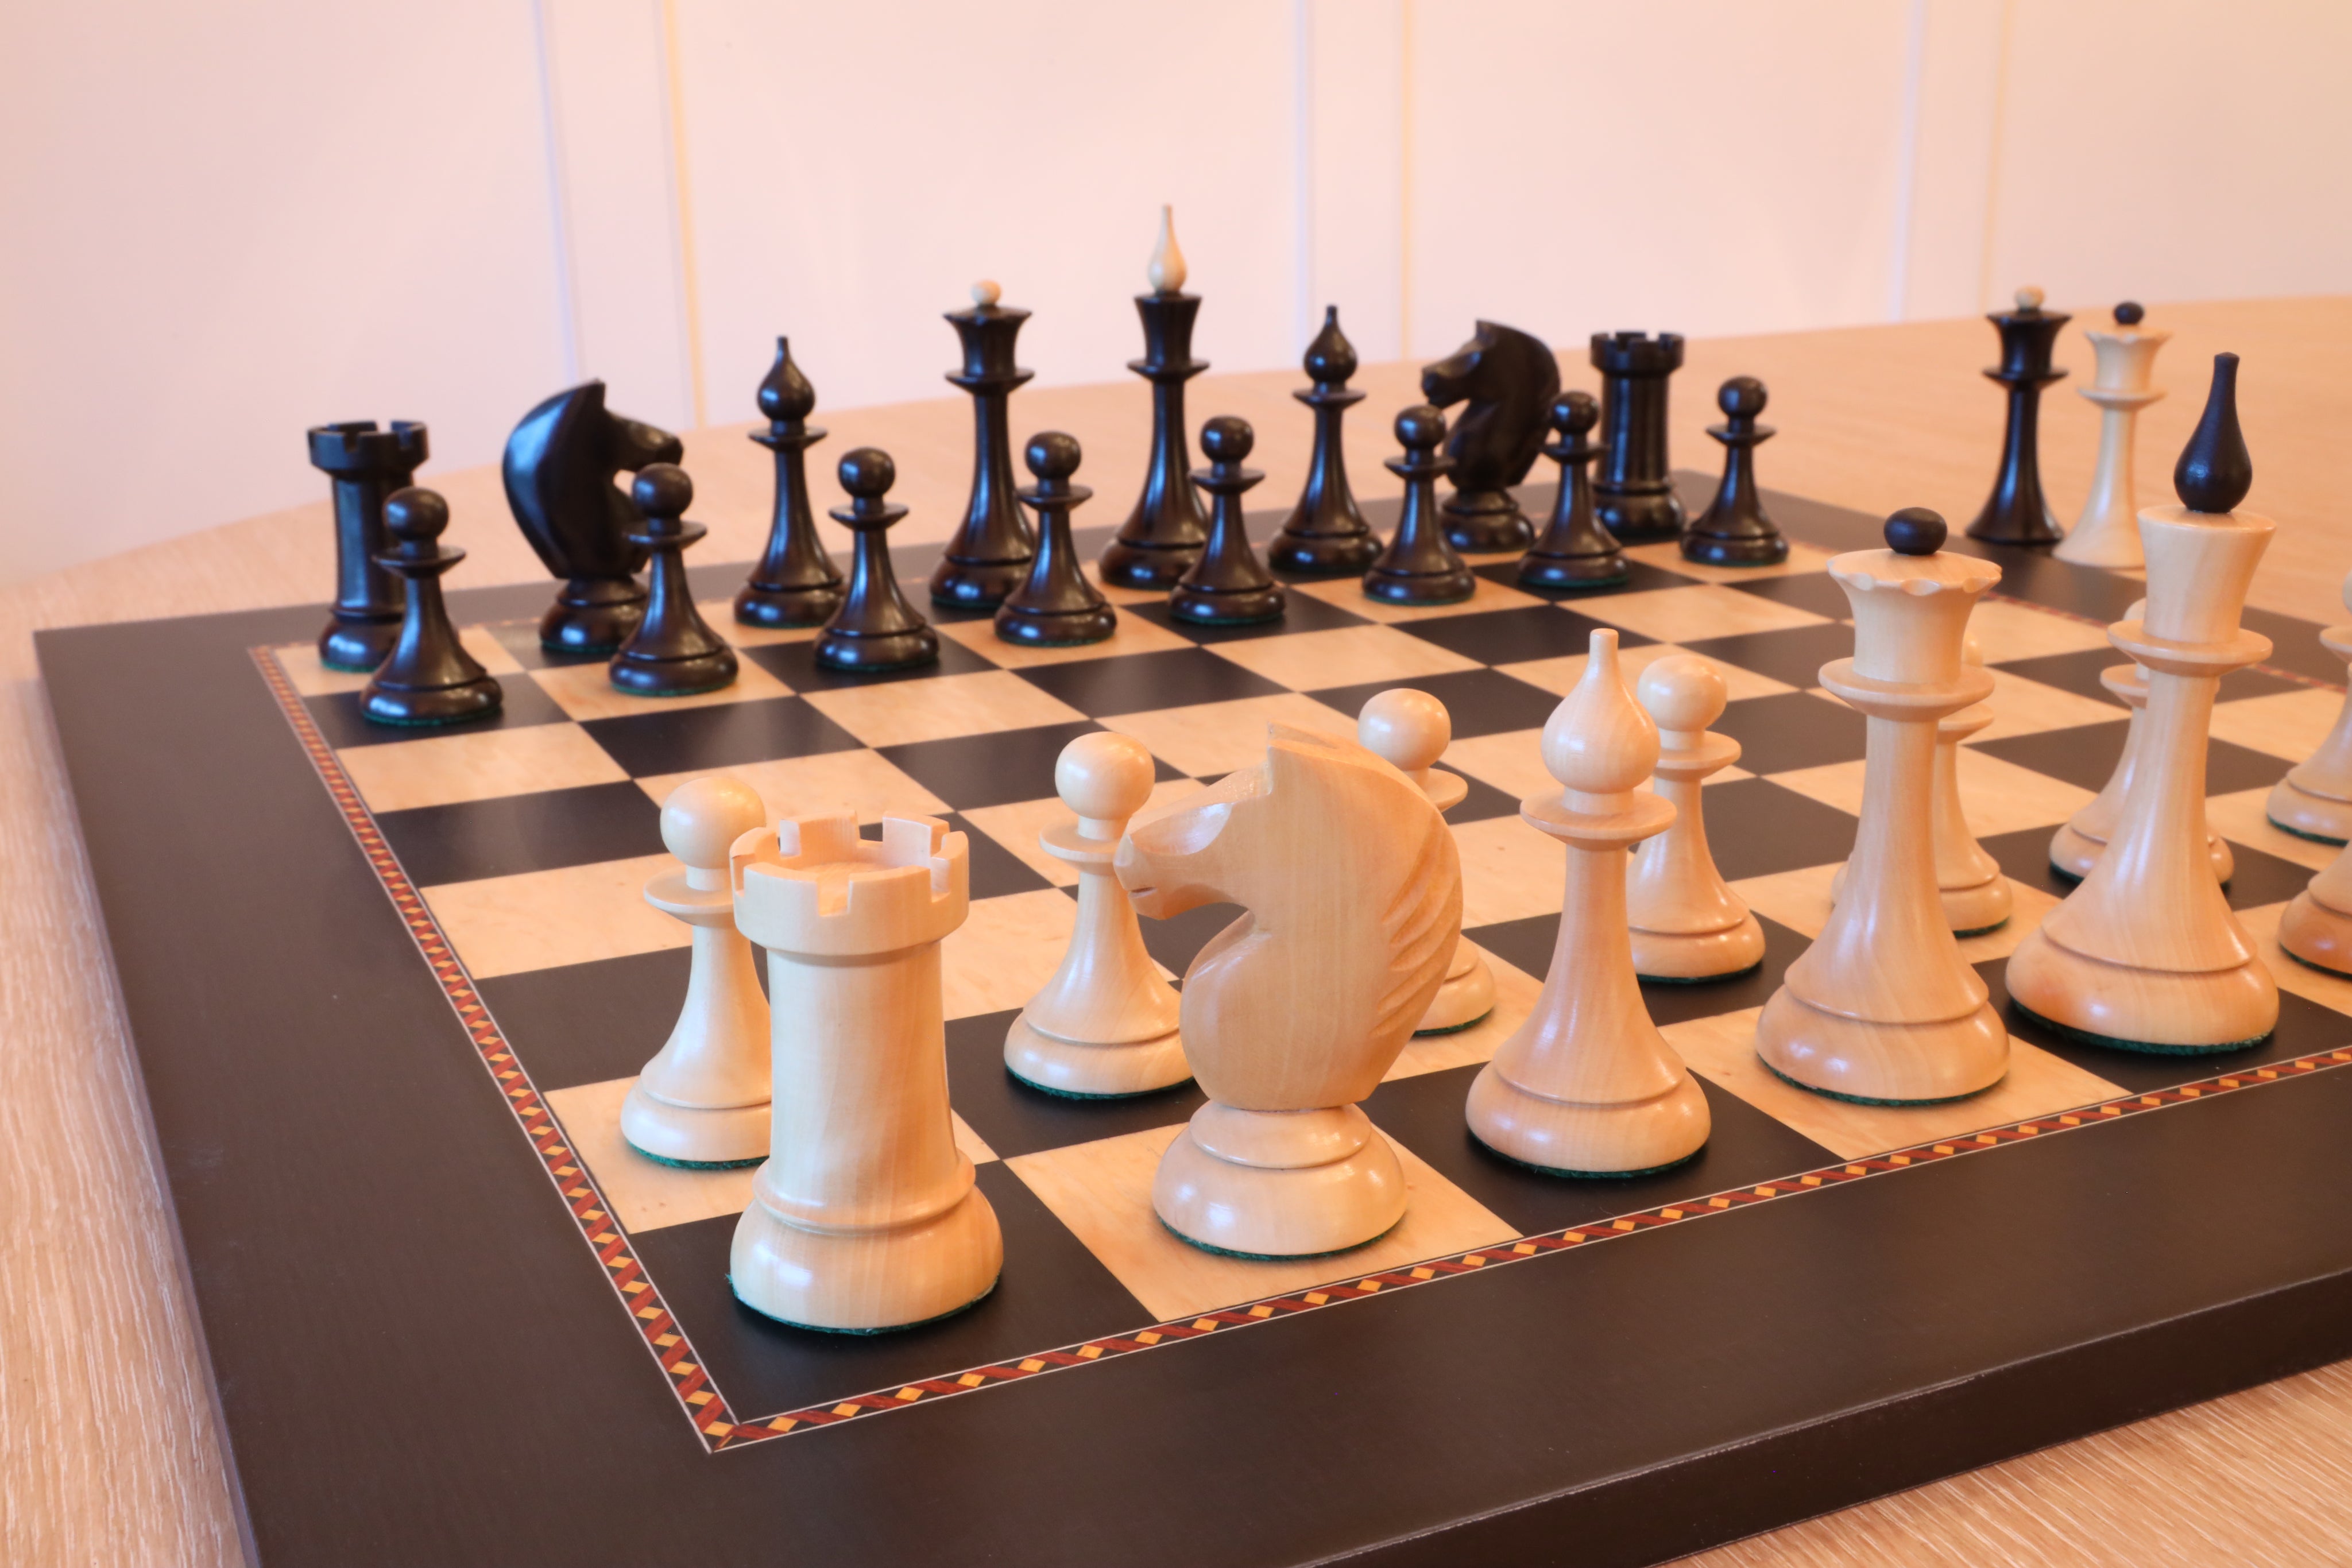 The Queen's Gambit Chess Set with Ebonized & Boxwood Pieces - 3.75 King -  The Chess Store